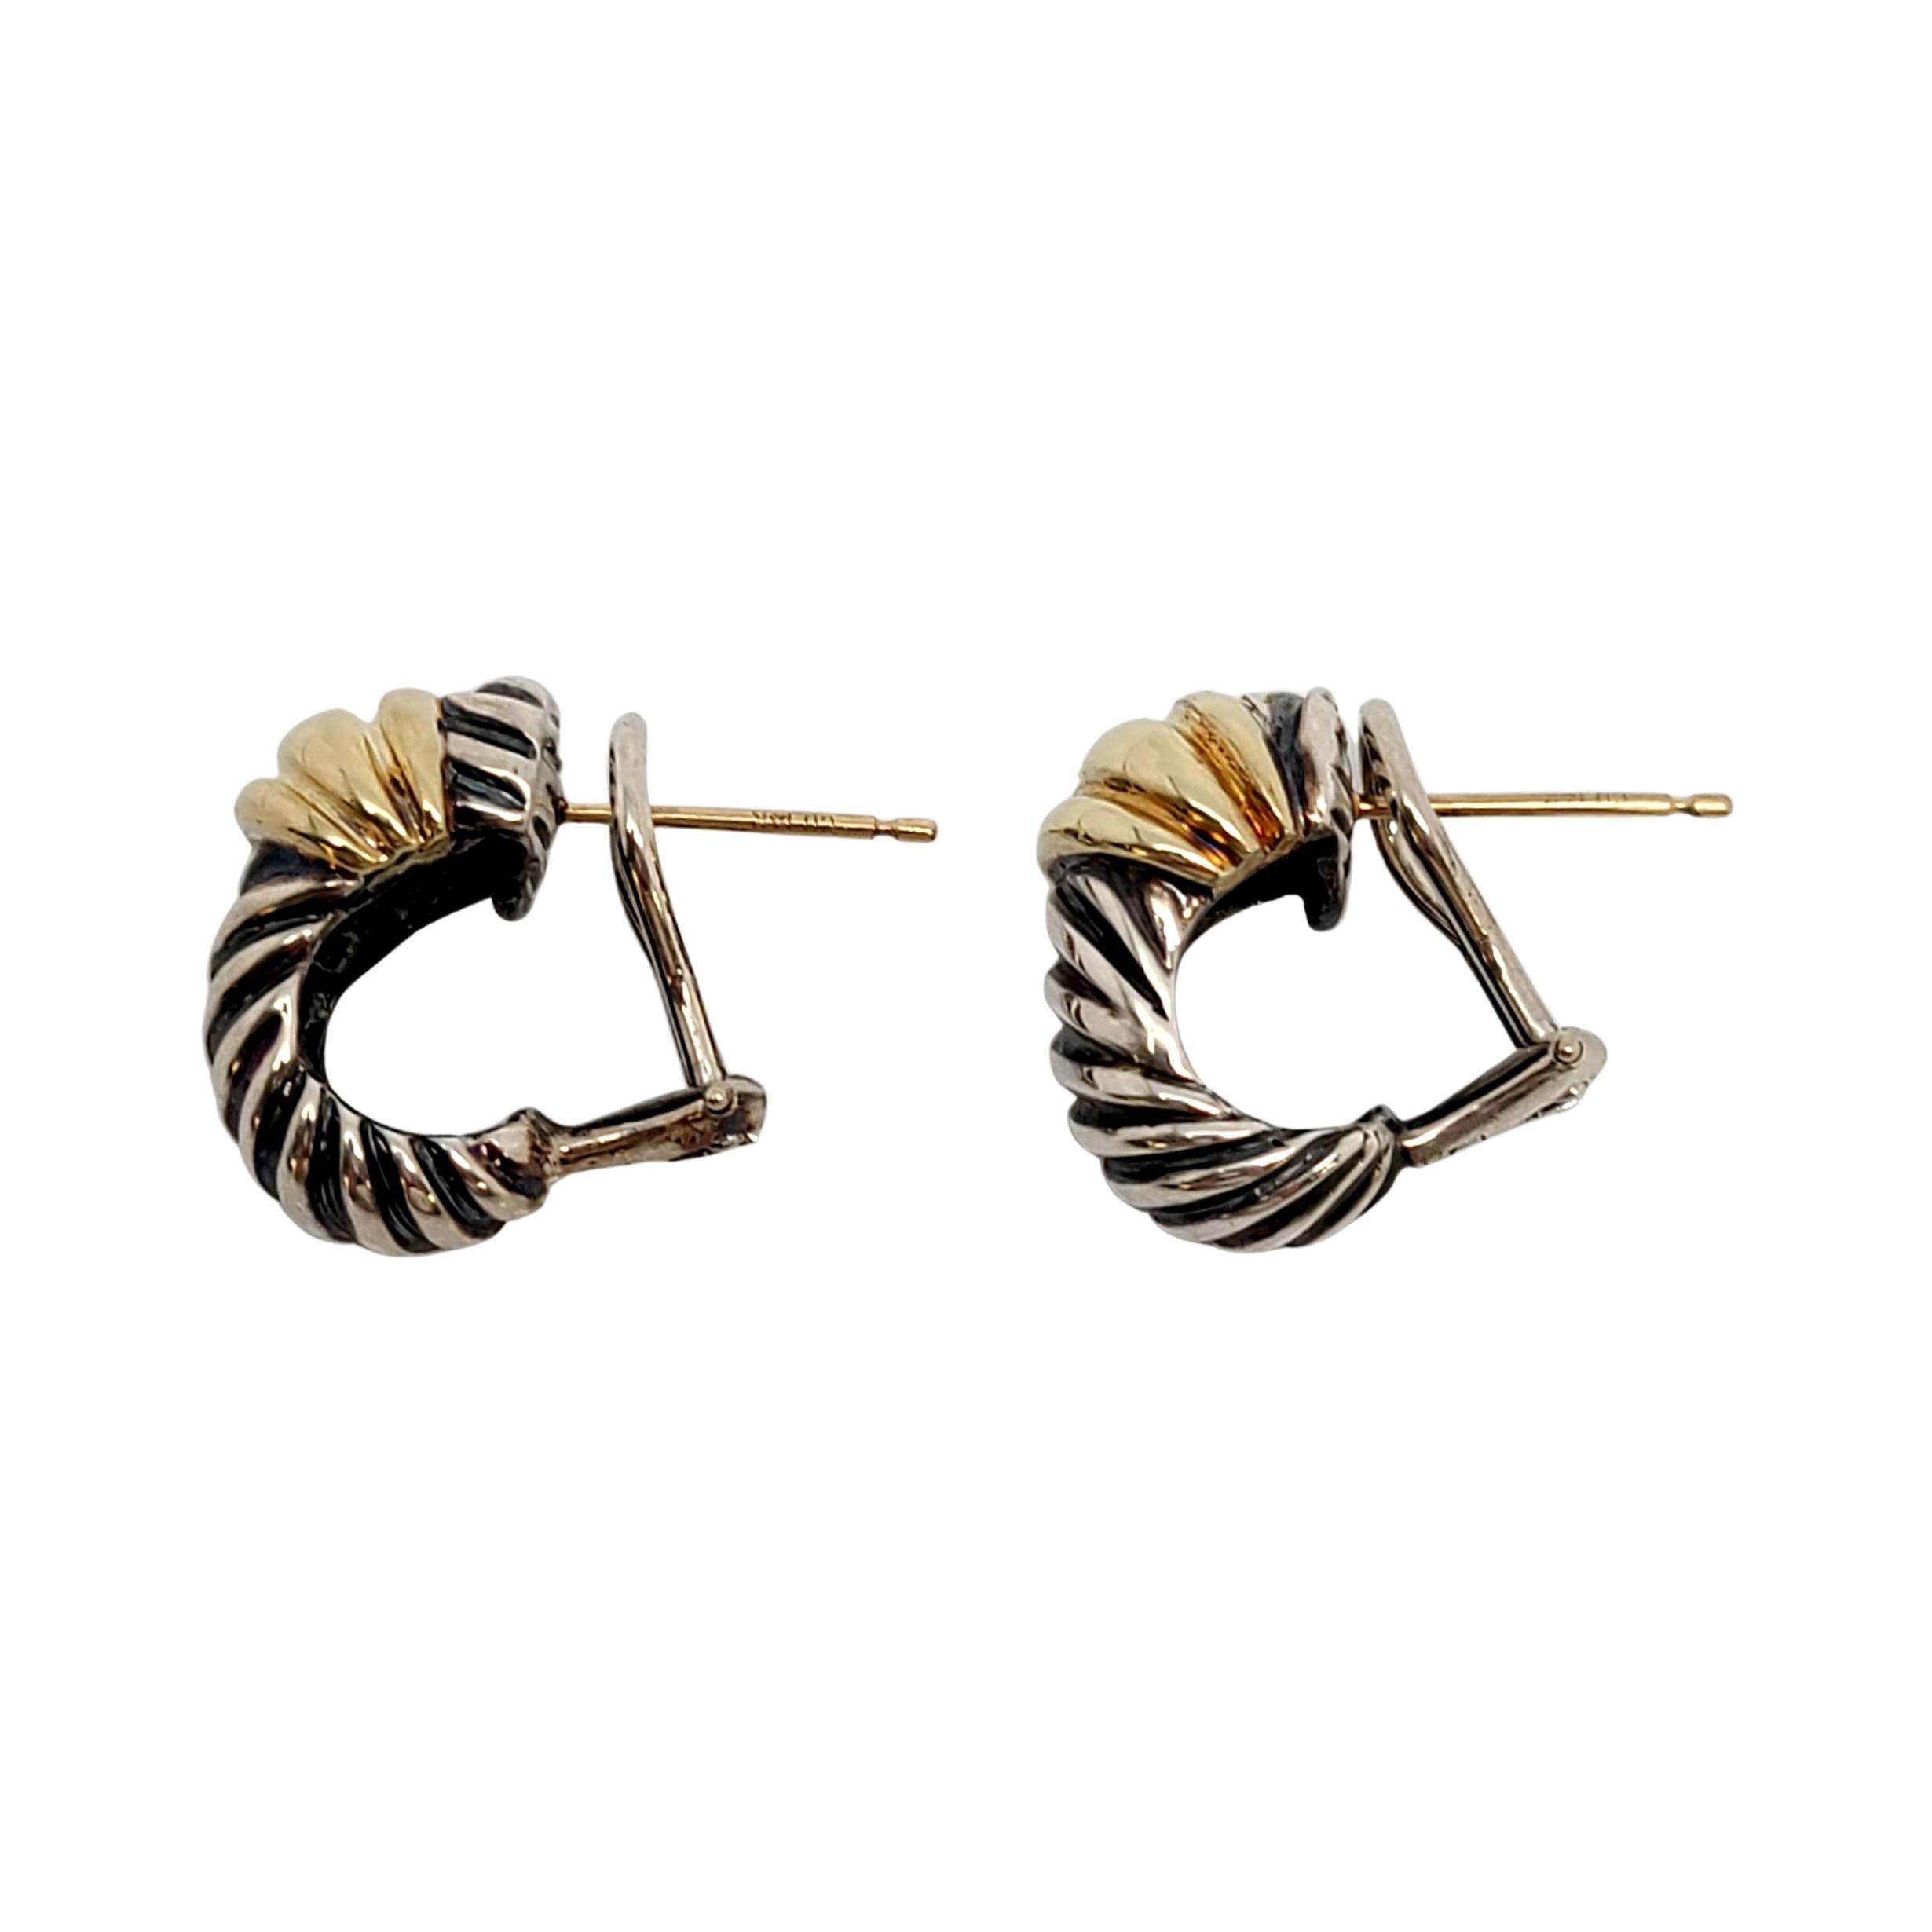 Sterling silver and 14K yellow gold earrings from David Yurman's Thoroughbred Cable Classics Collection by David Yurman.

Classic cable design from the Thoroughbred collection features sterling silver shrimp design earrings with 14K yellow gold